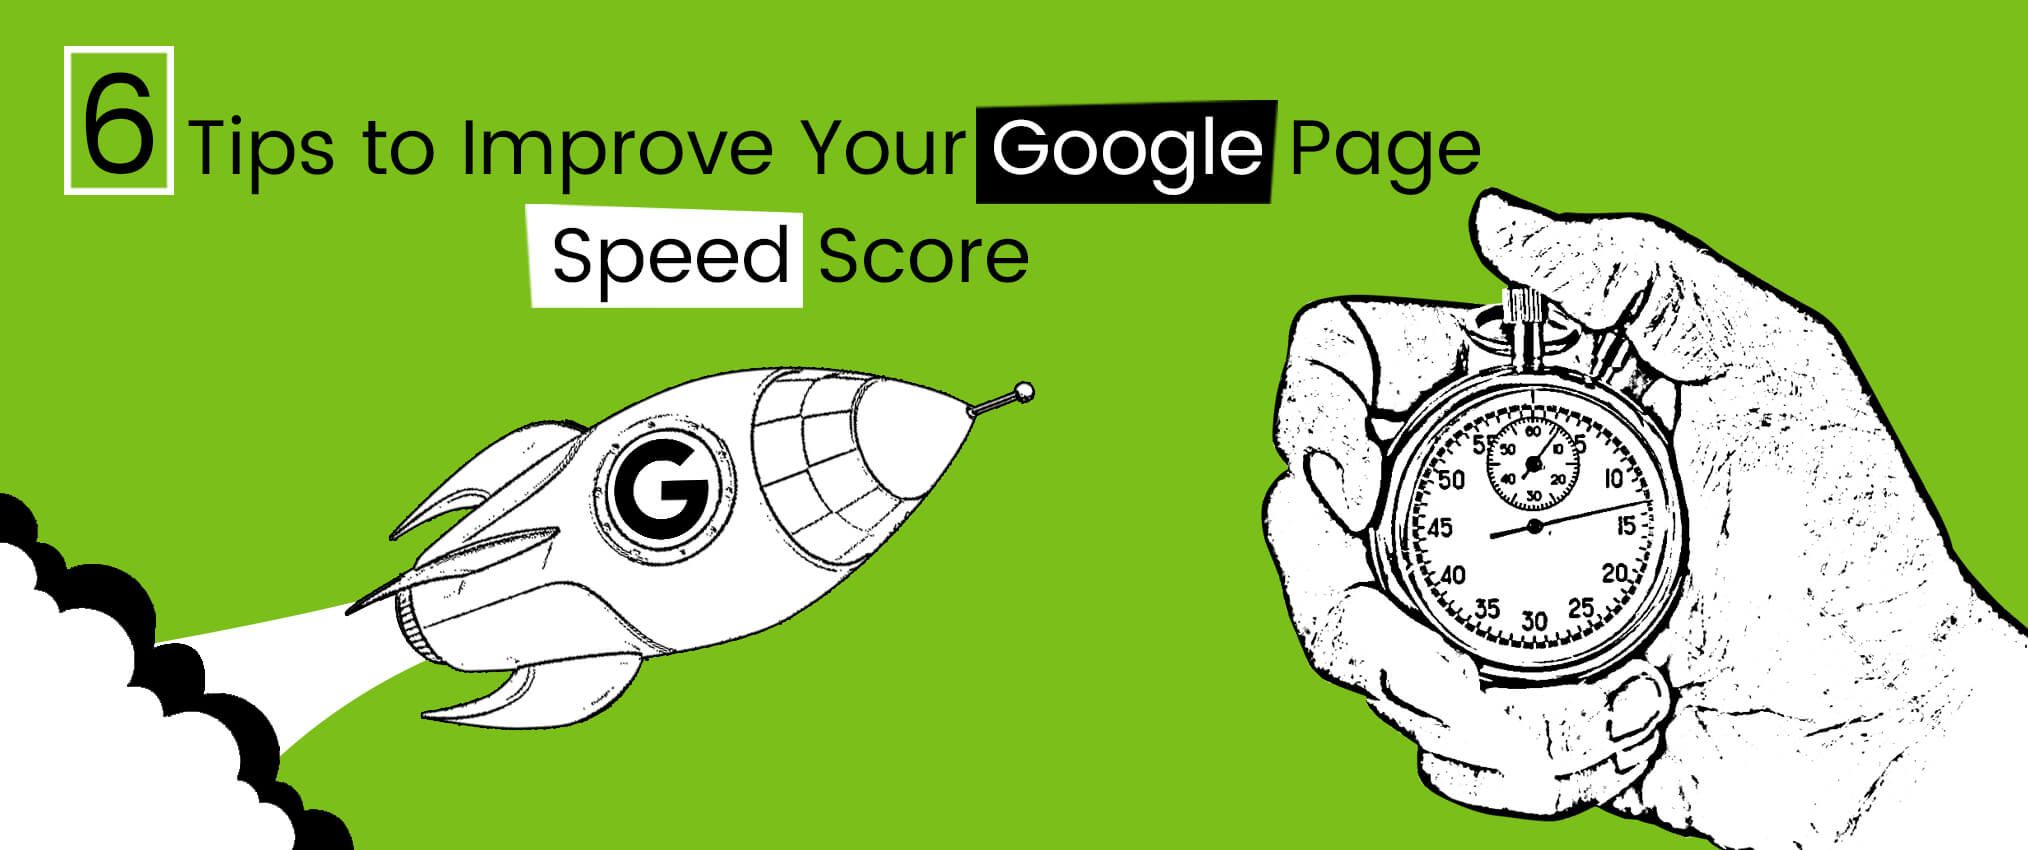 6 Tips to Improve Your Google Page Speed Score